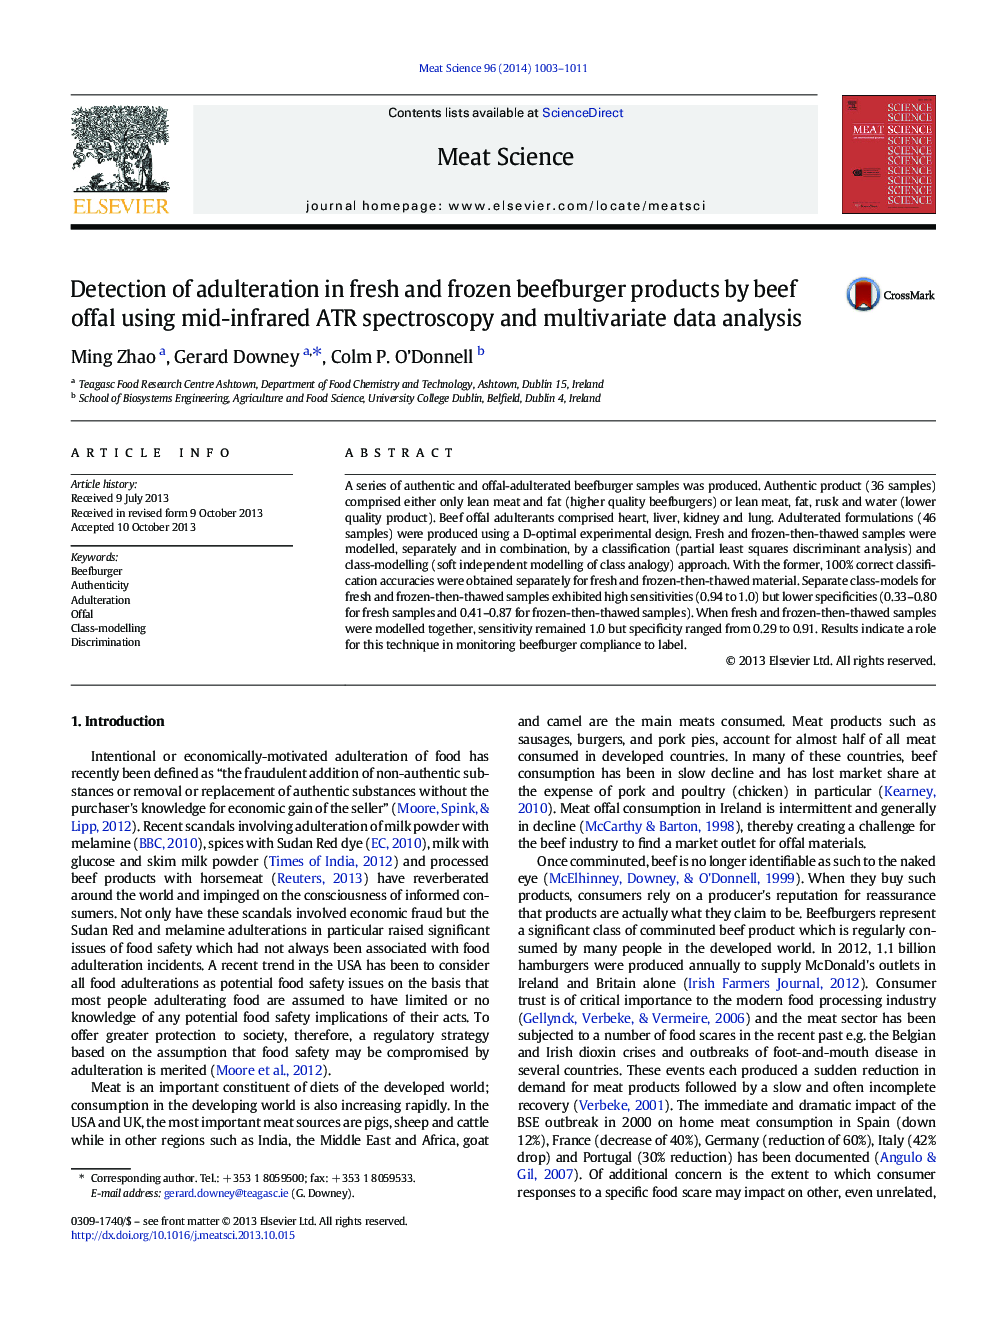 Detection of adulteration in fresh and frozen beefburger products by beef offal using mid-infrared ATR spectroscopy and multivariate data analysis